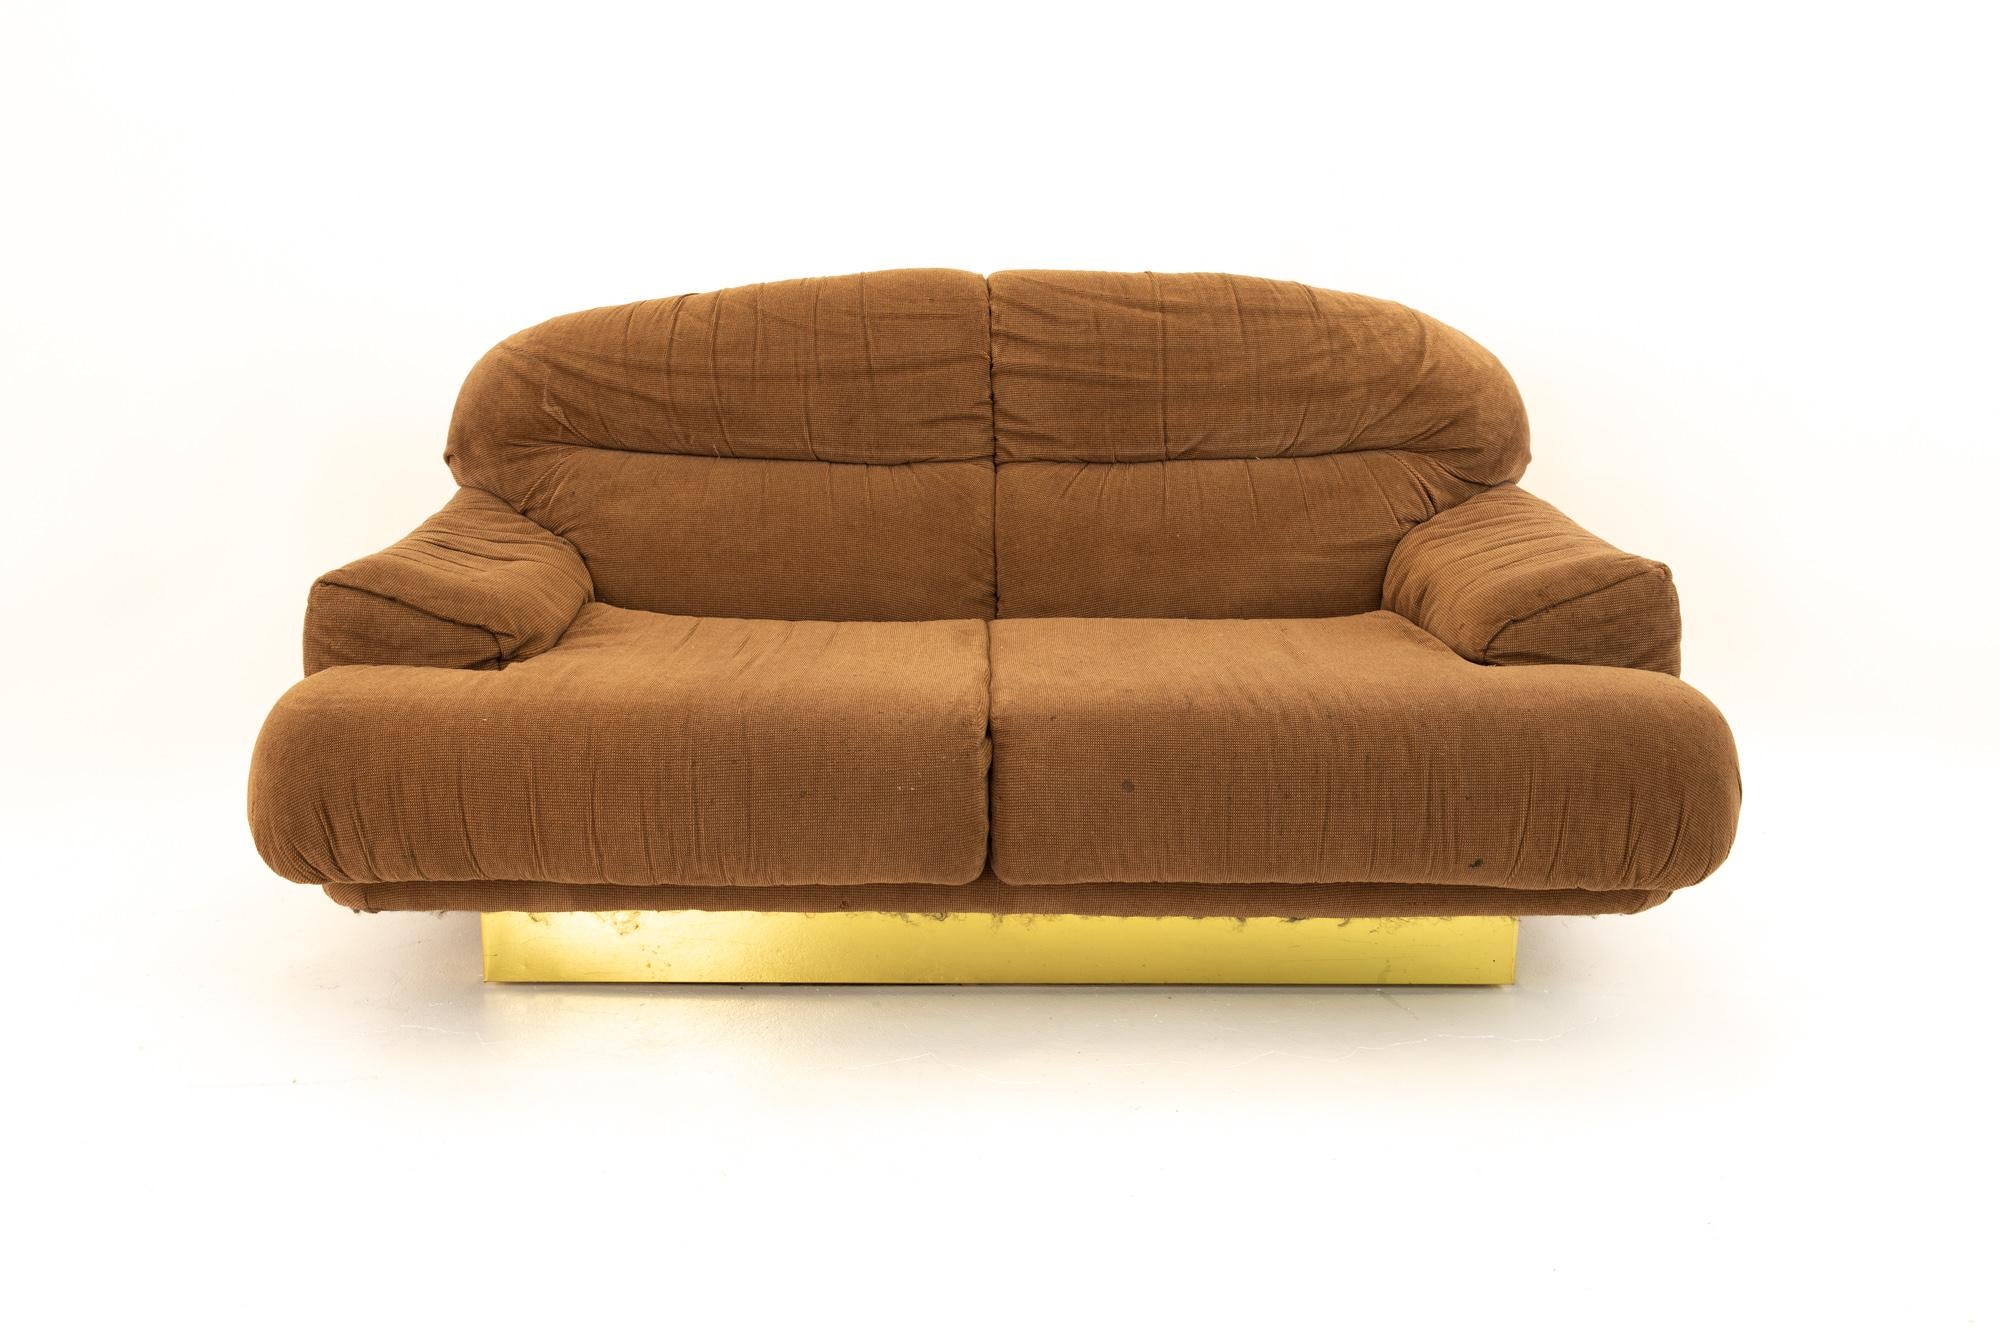 Milo Baughman style mid century brass base sofa
Sofa measures: 59 wide x 39 deep x 32 high with a seat height of 14 inches

This price includes getting this piece in what we call restored vintage condition. Upon purchase it is fixed so it’s free